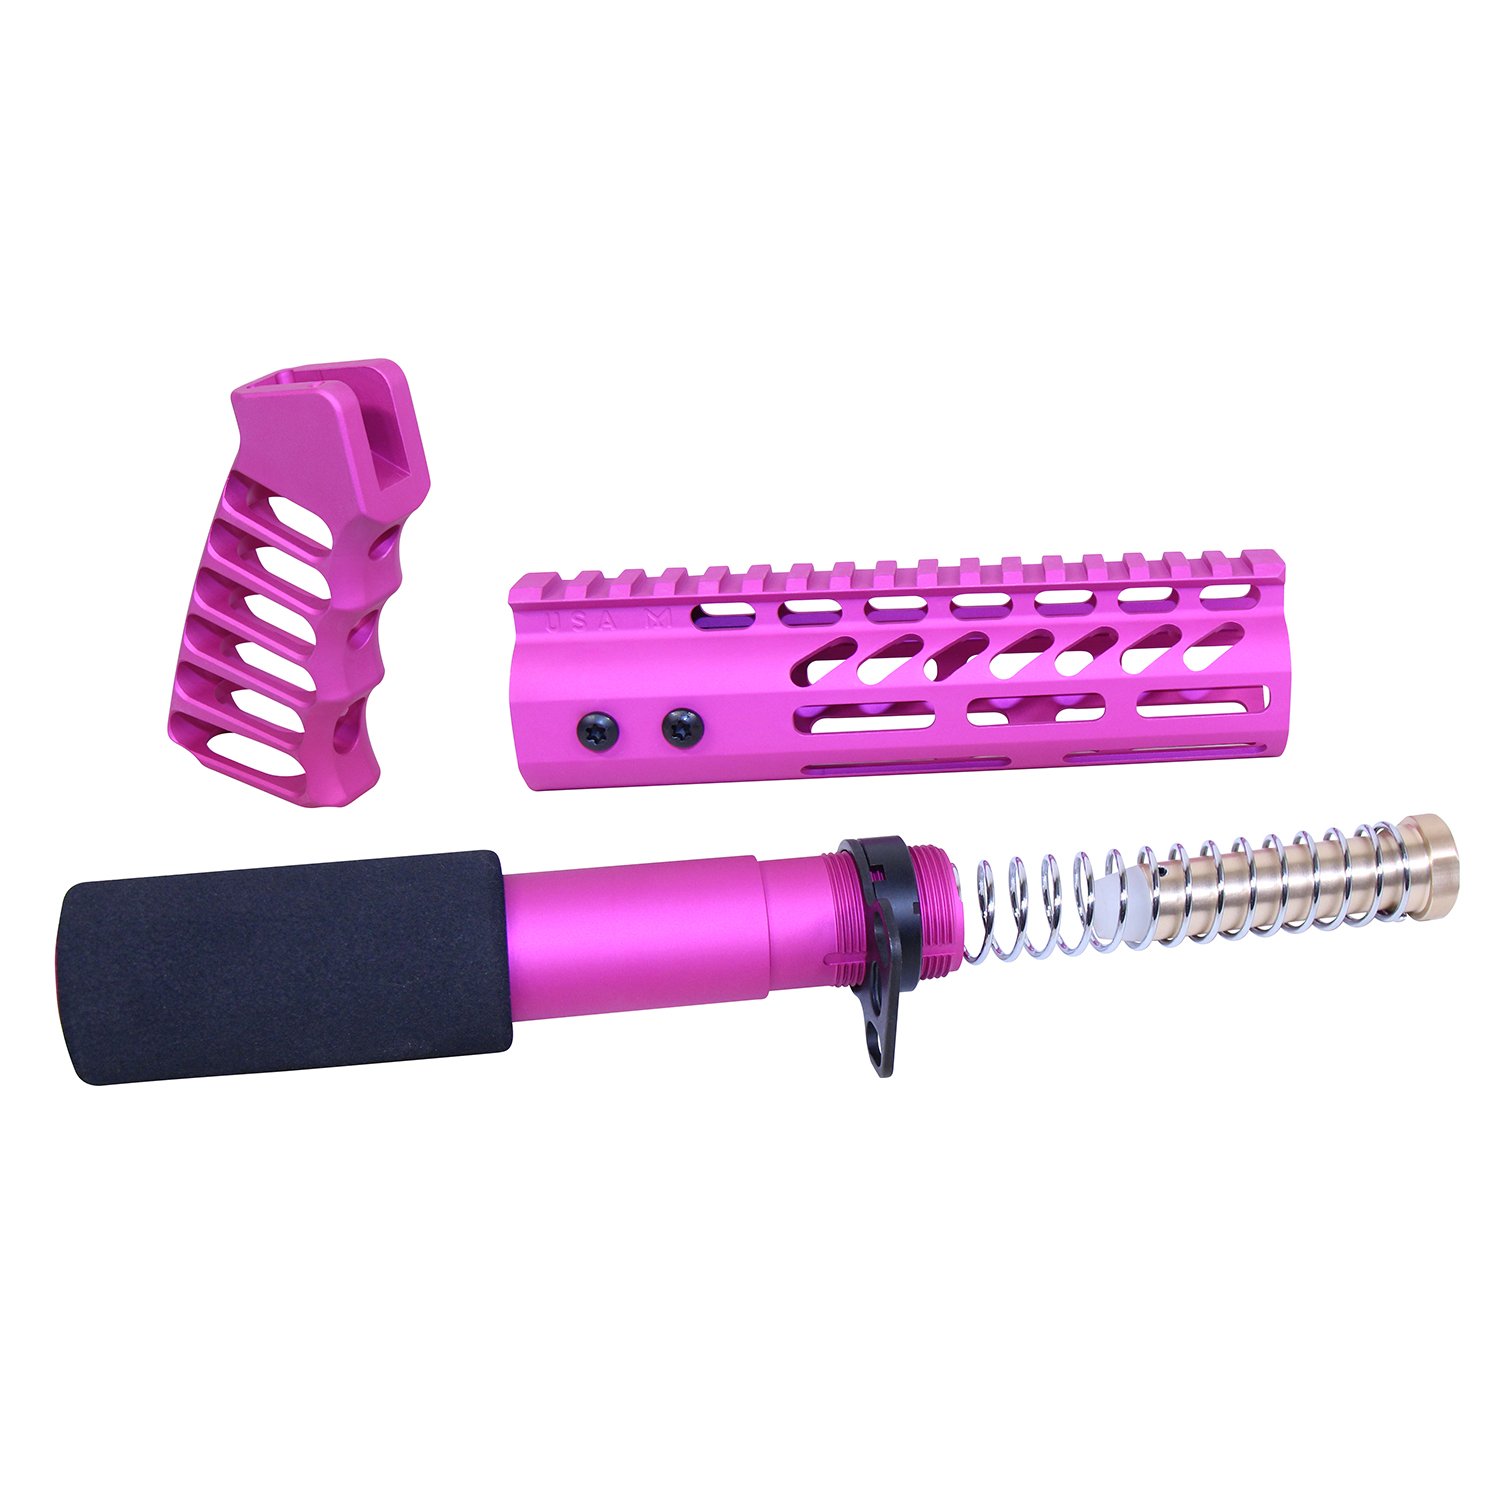 AR-15 Pistol Furniture Set in Anodized Pink